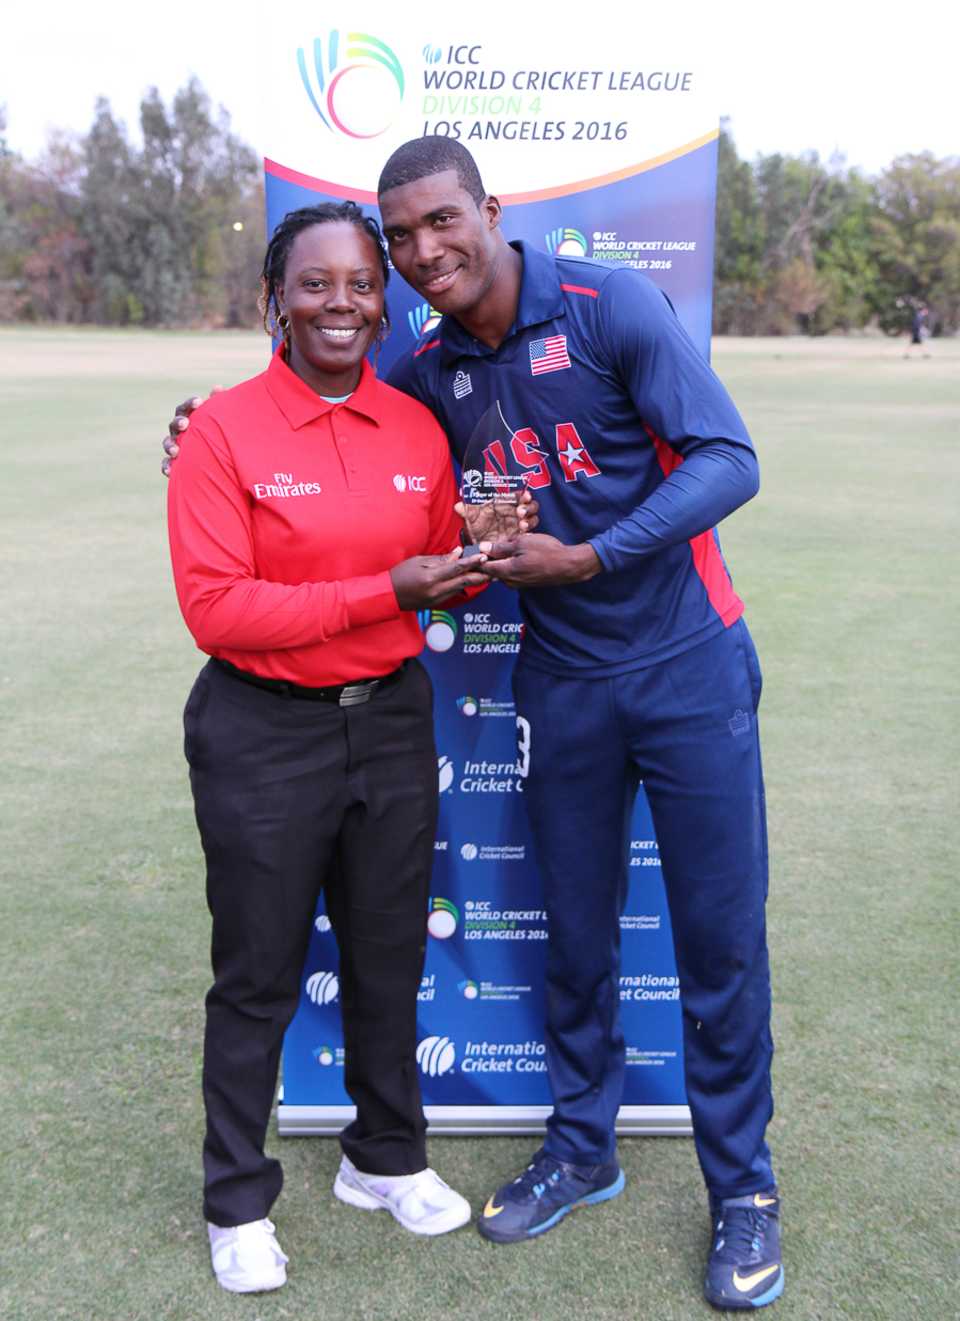 Timroy Allen accepts the Man of the Match award from umpire Jacqueline Williams